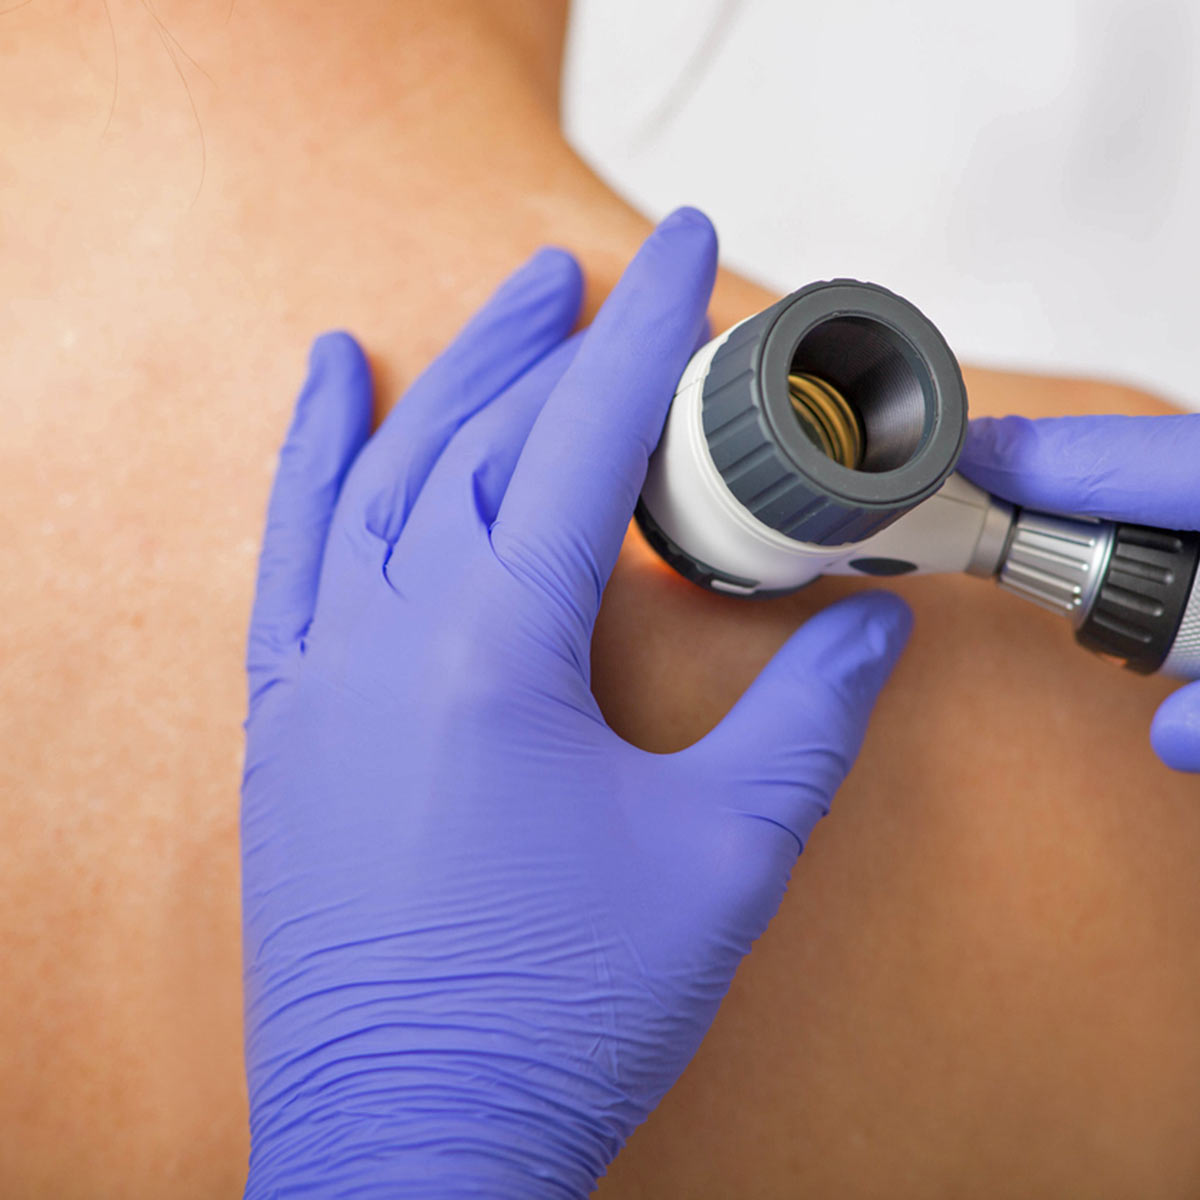 Closeup of a person's bare back while a doctors uses a scope to examine one area more closely.